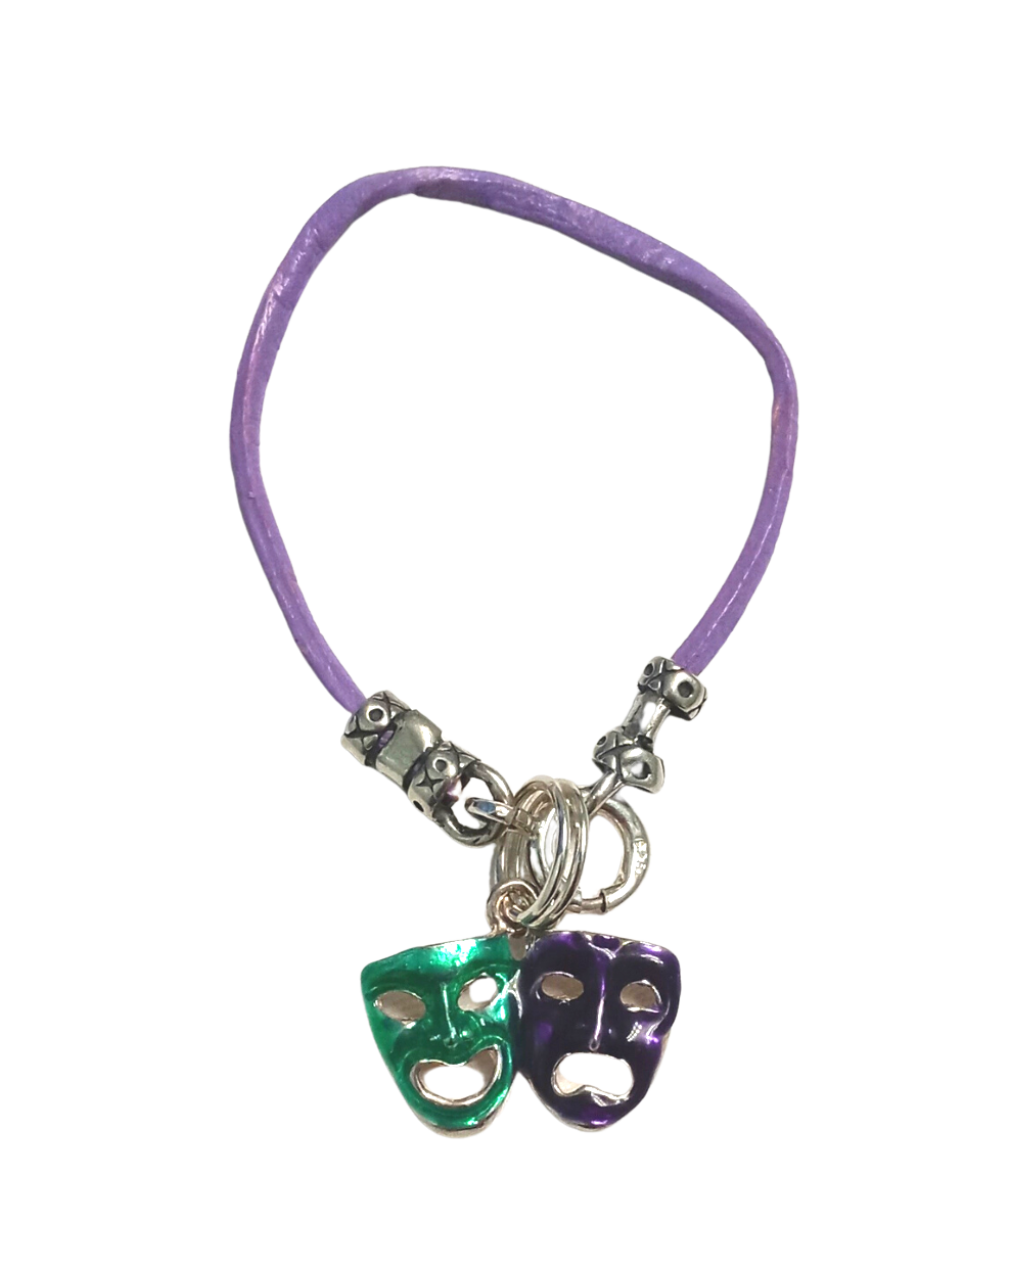 Mardi Gras Hand-enameled Green Purple Comedy/Tragedy Removable Mask Sterling Charm on Leather KooLoop.